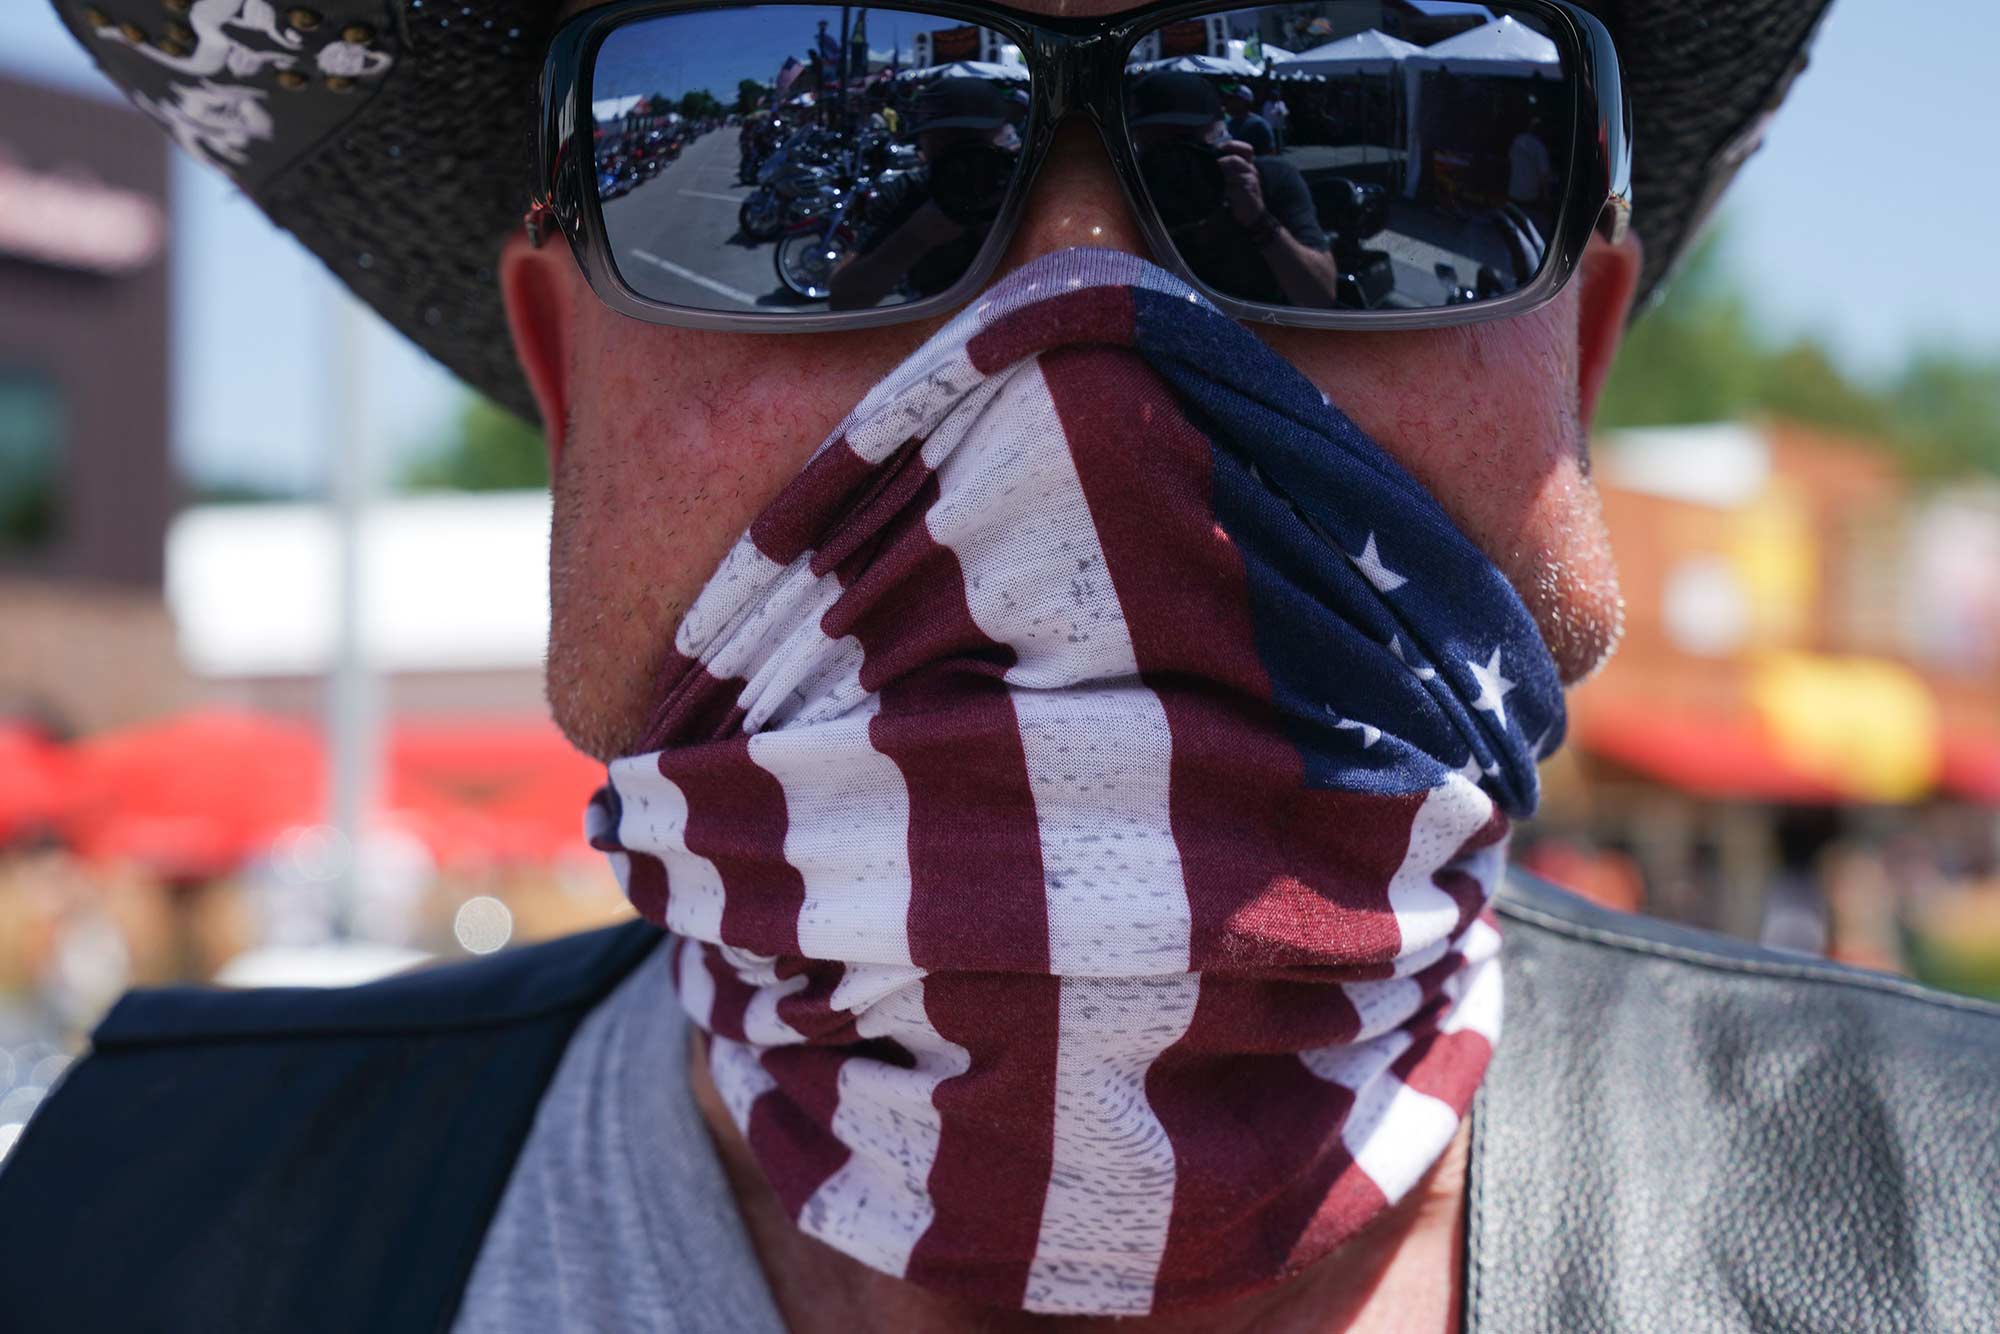 Sturgis rally participant Dane Senser wears an American flag face covering as he poses on Main Street.